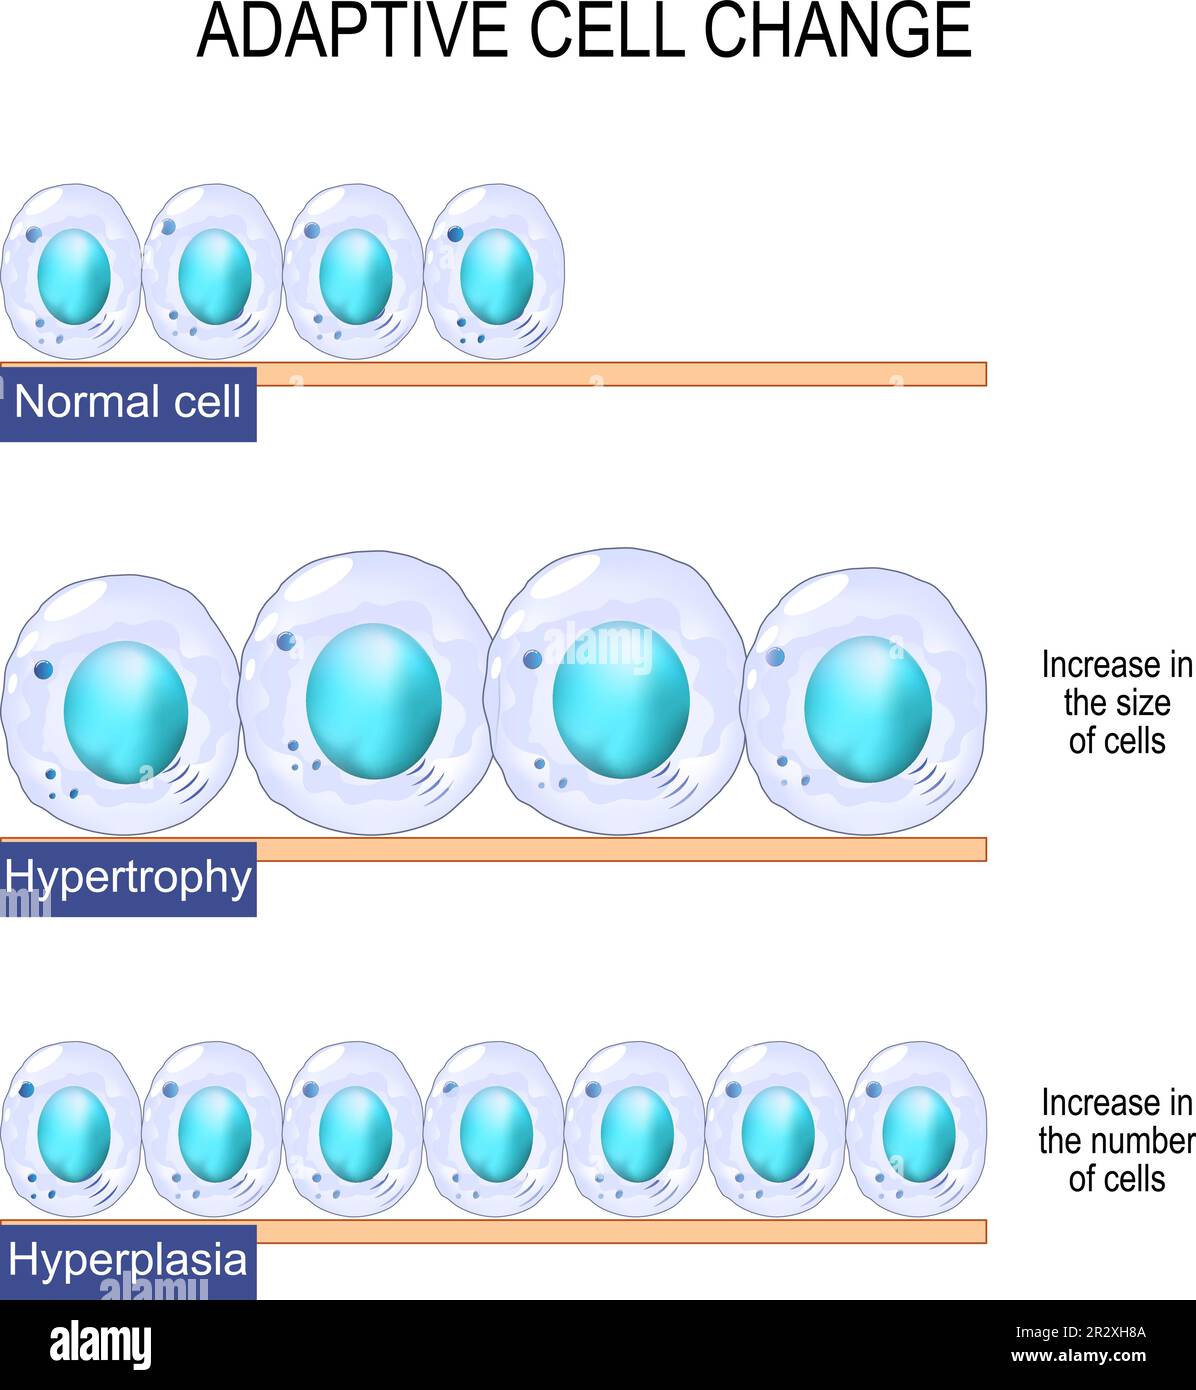 adaptive cell change. Normal cell, hypertrophy is an increase in the size of cells, and hyperplasia -increase in the number of cells. Vector Poster Stock Vector